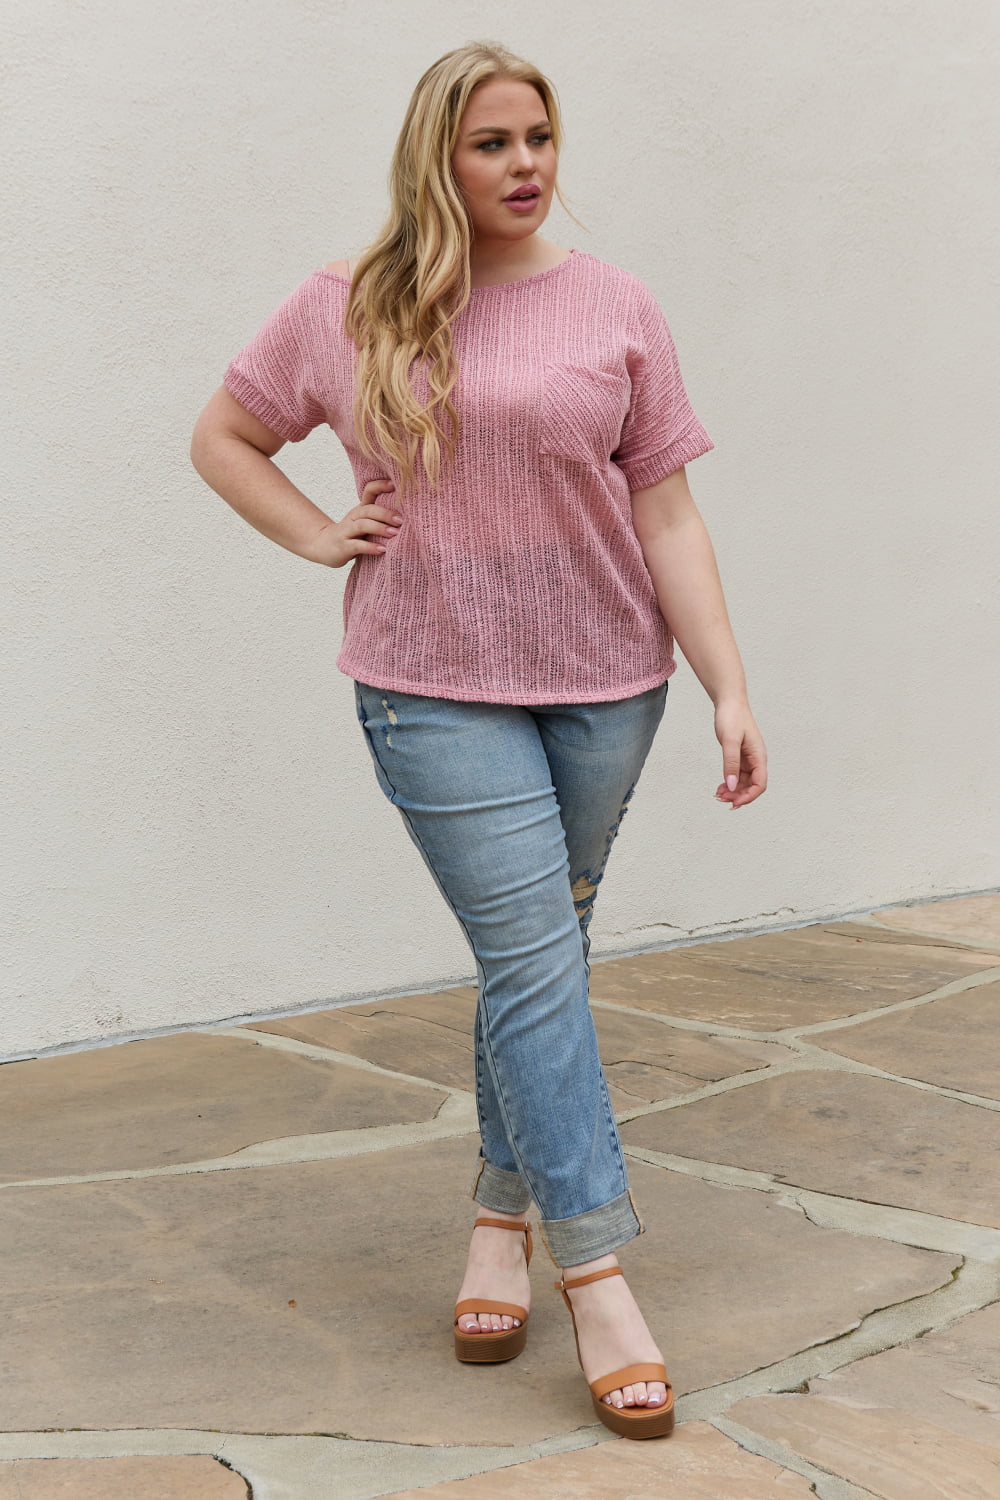 Chunky Knit Short Sleeve Top in Mauve - Camis & Tops - Shirts & Tops - 11 - 2024